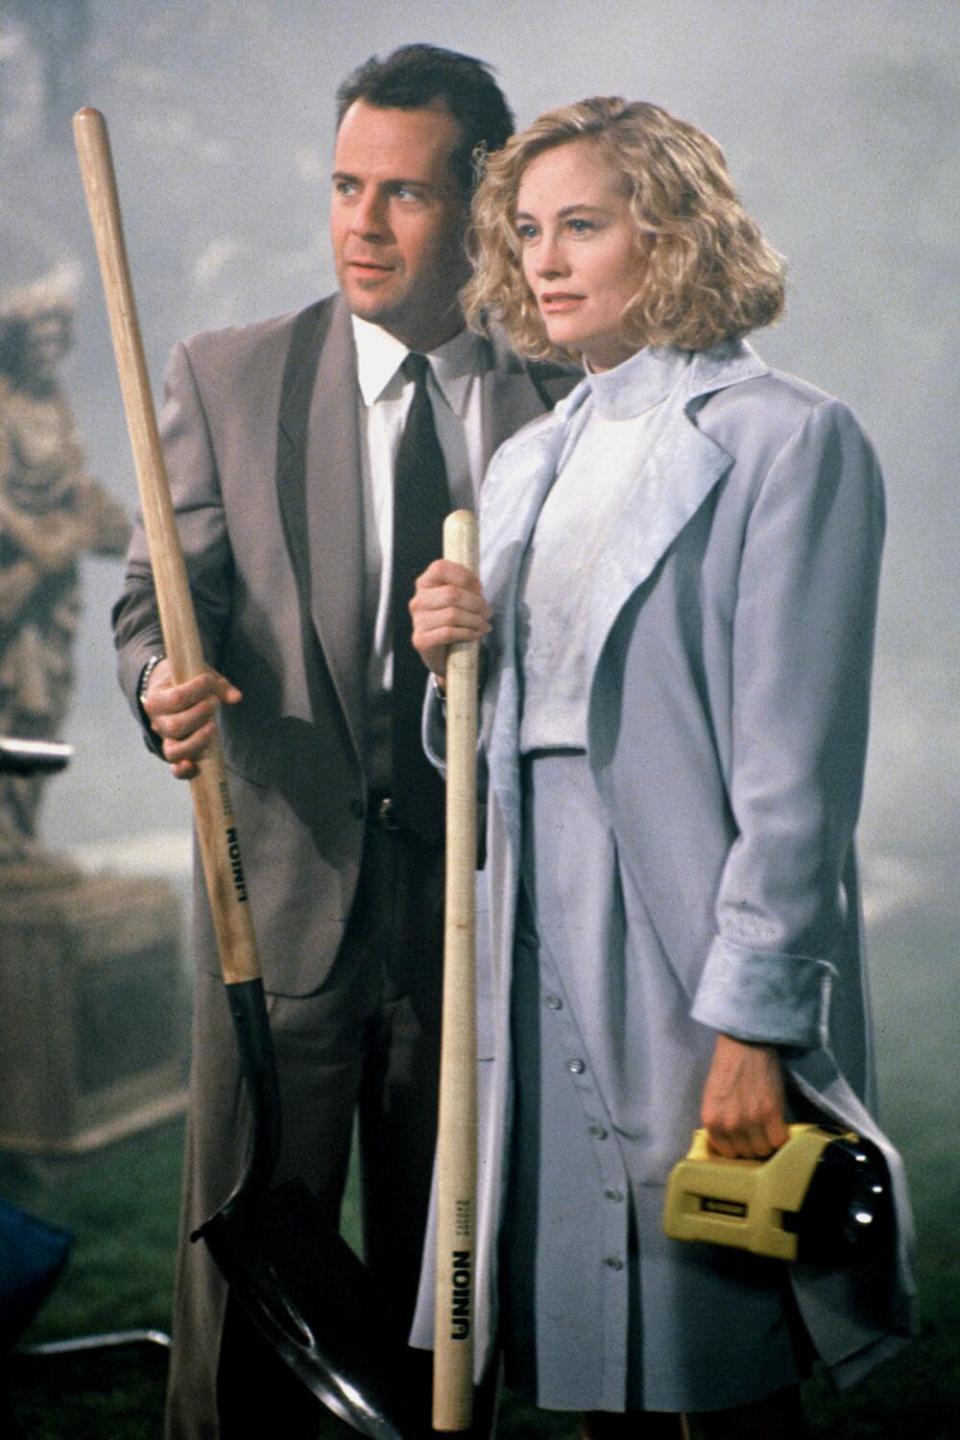 A man in a suit and a woman in a pale blue skirt suit, both holding large wooden sticks